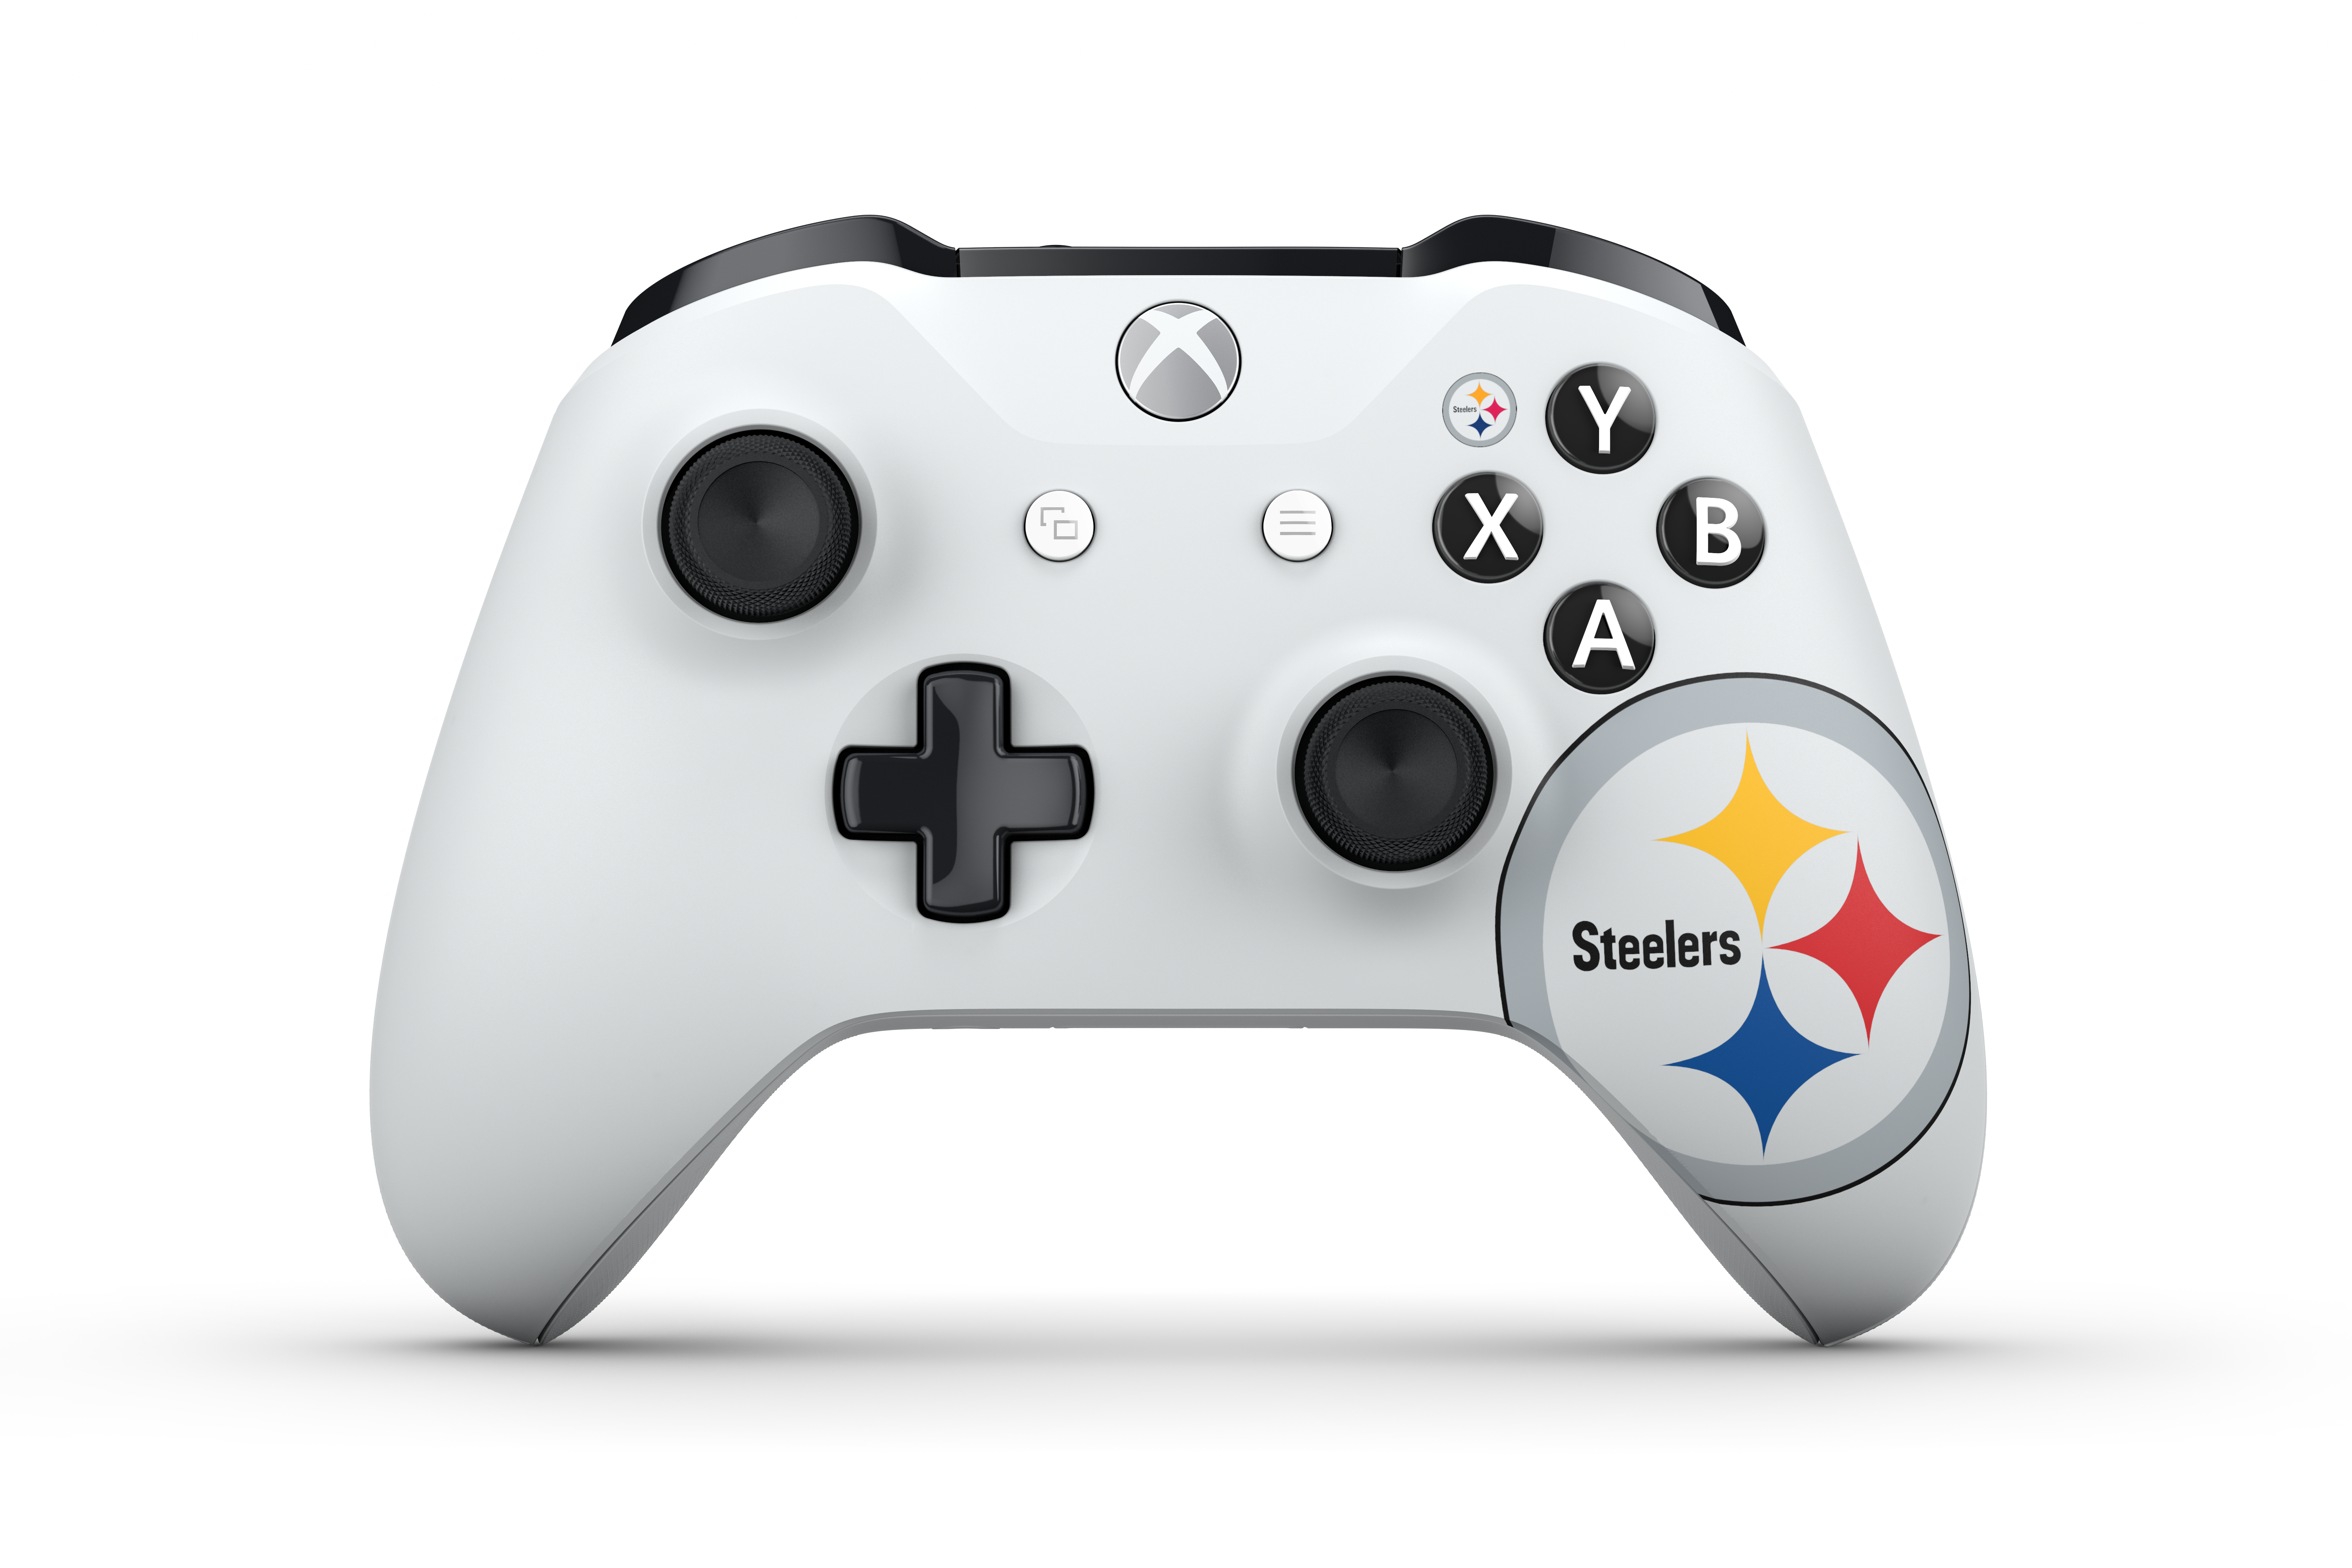 steelers xbox one controller